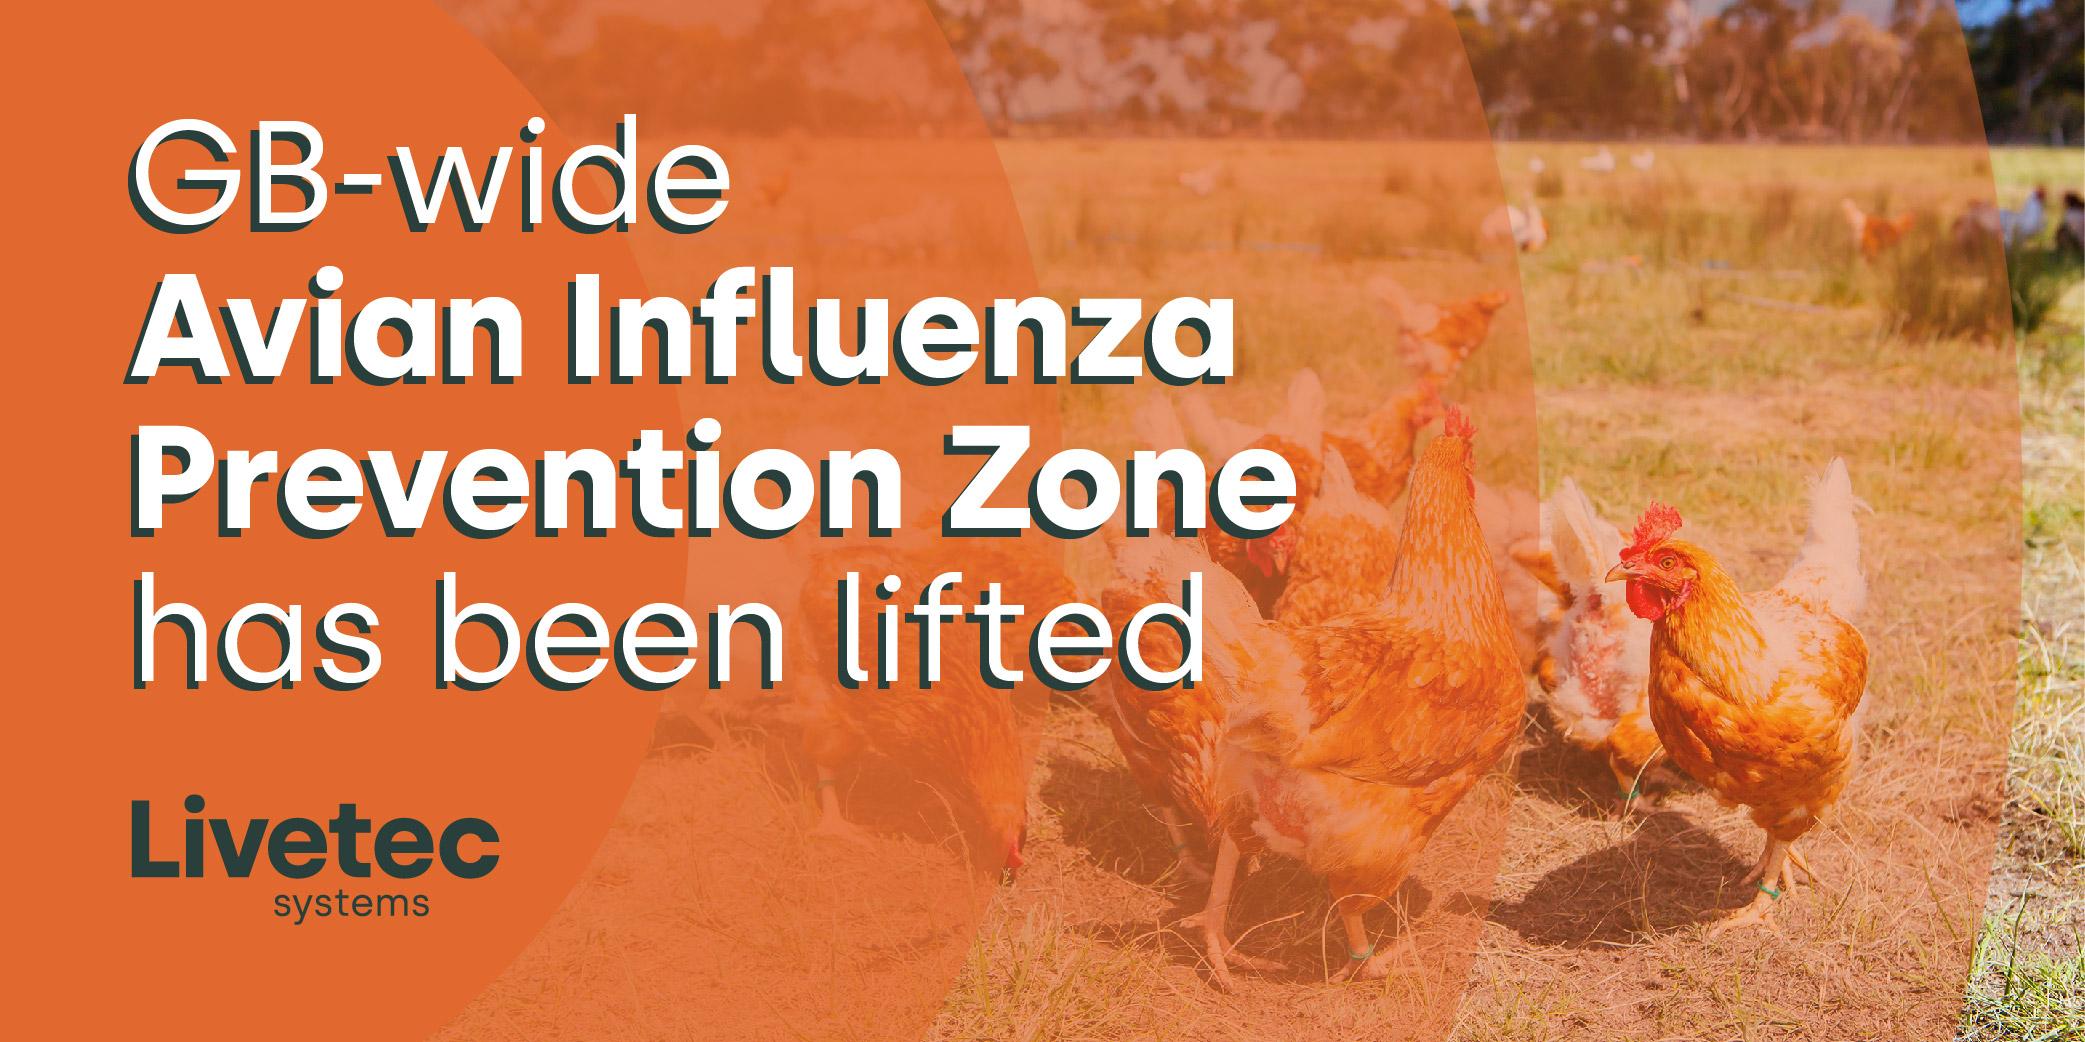 The Avian Influenza Prevention Zone for Great Britain has been lifted as of the 4th July 2023. Biosecurity remains critical.